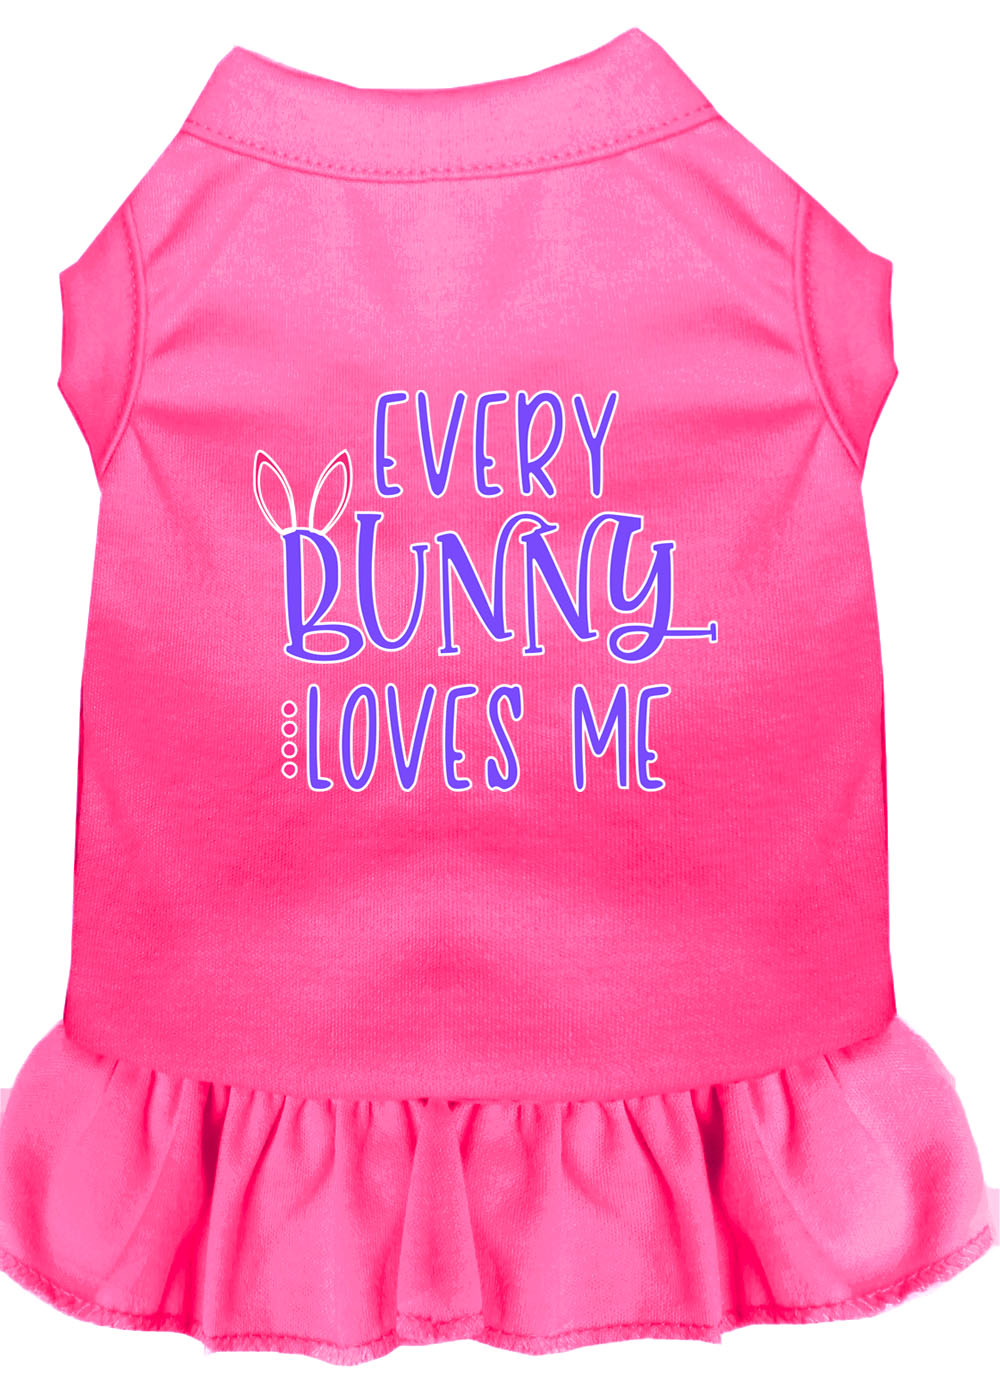 Every Bunny Loves me Screen Print Dog Dress Bright Pink Med